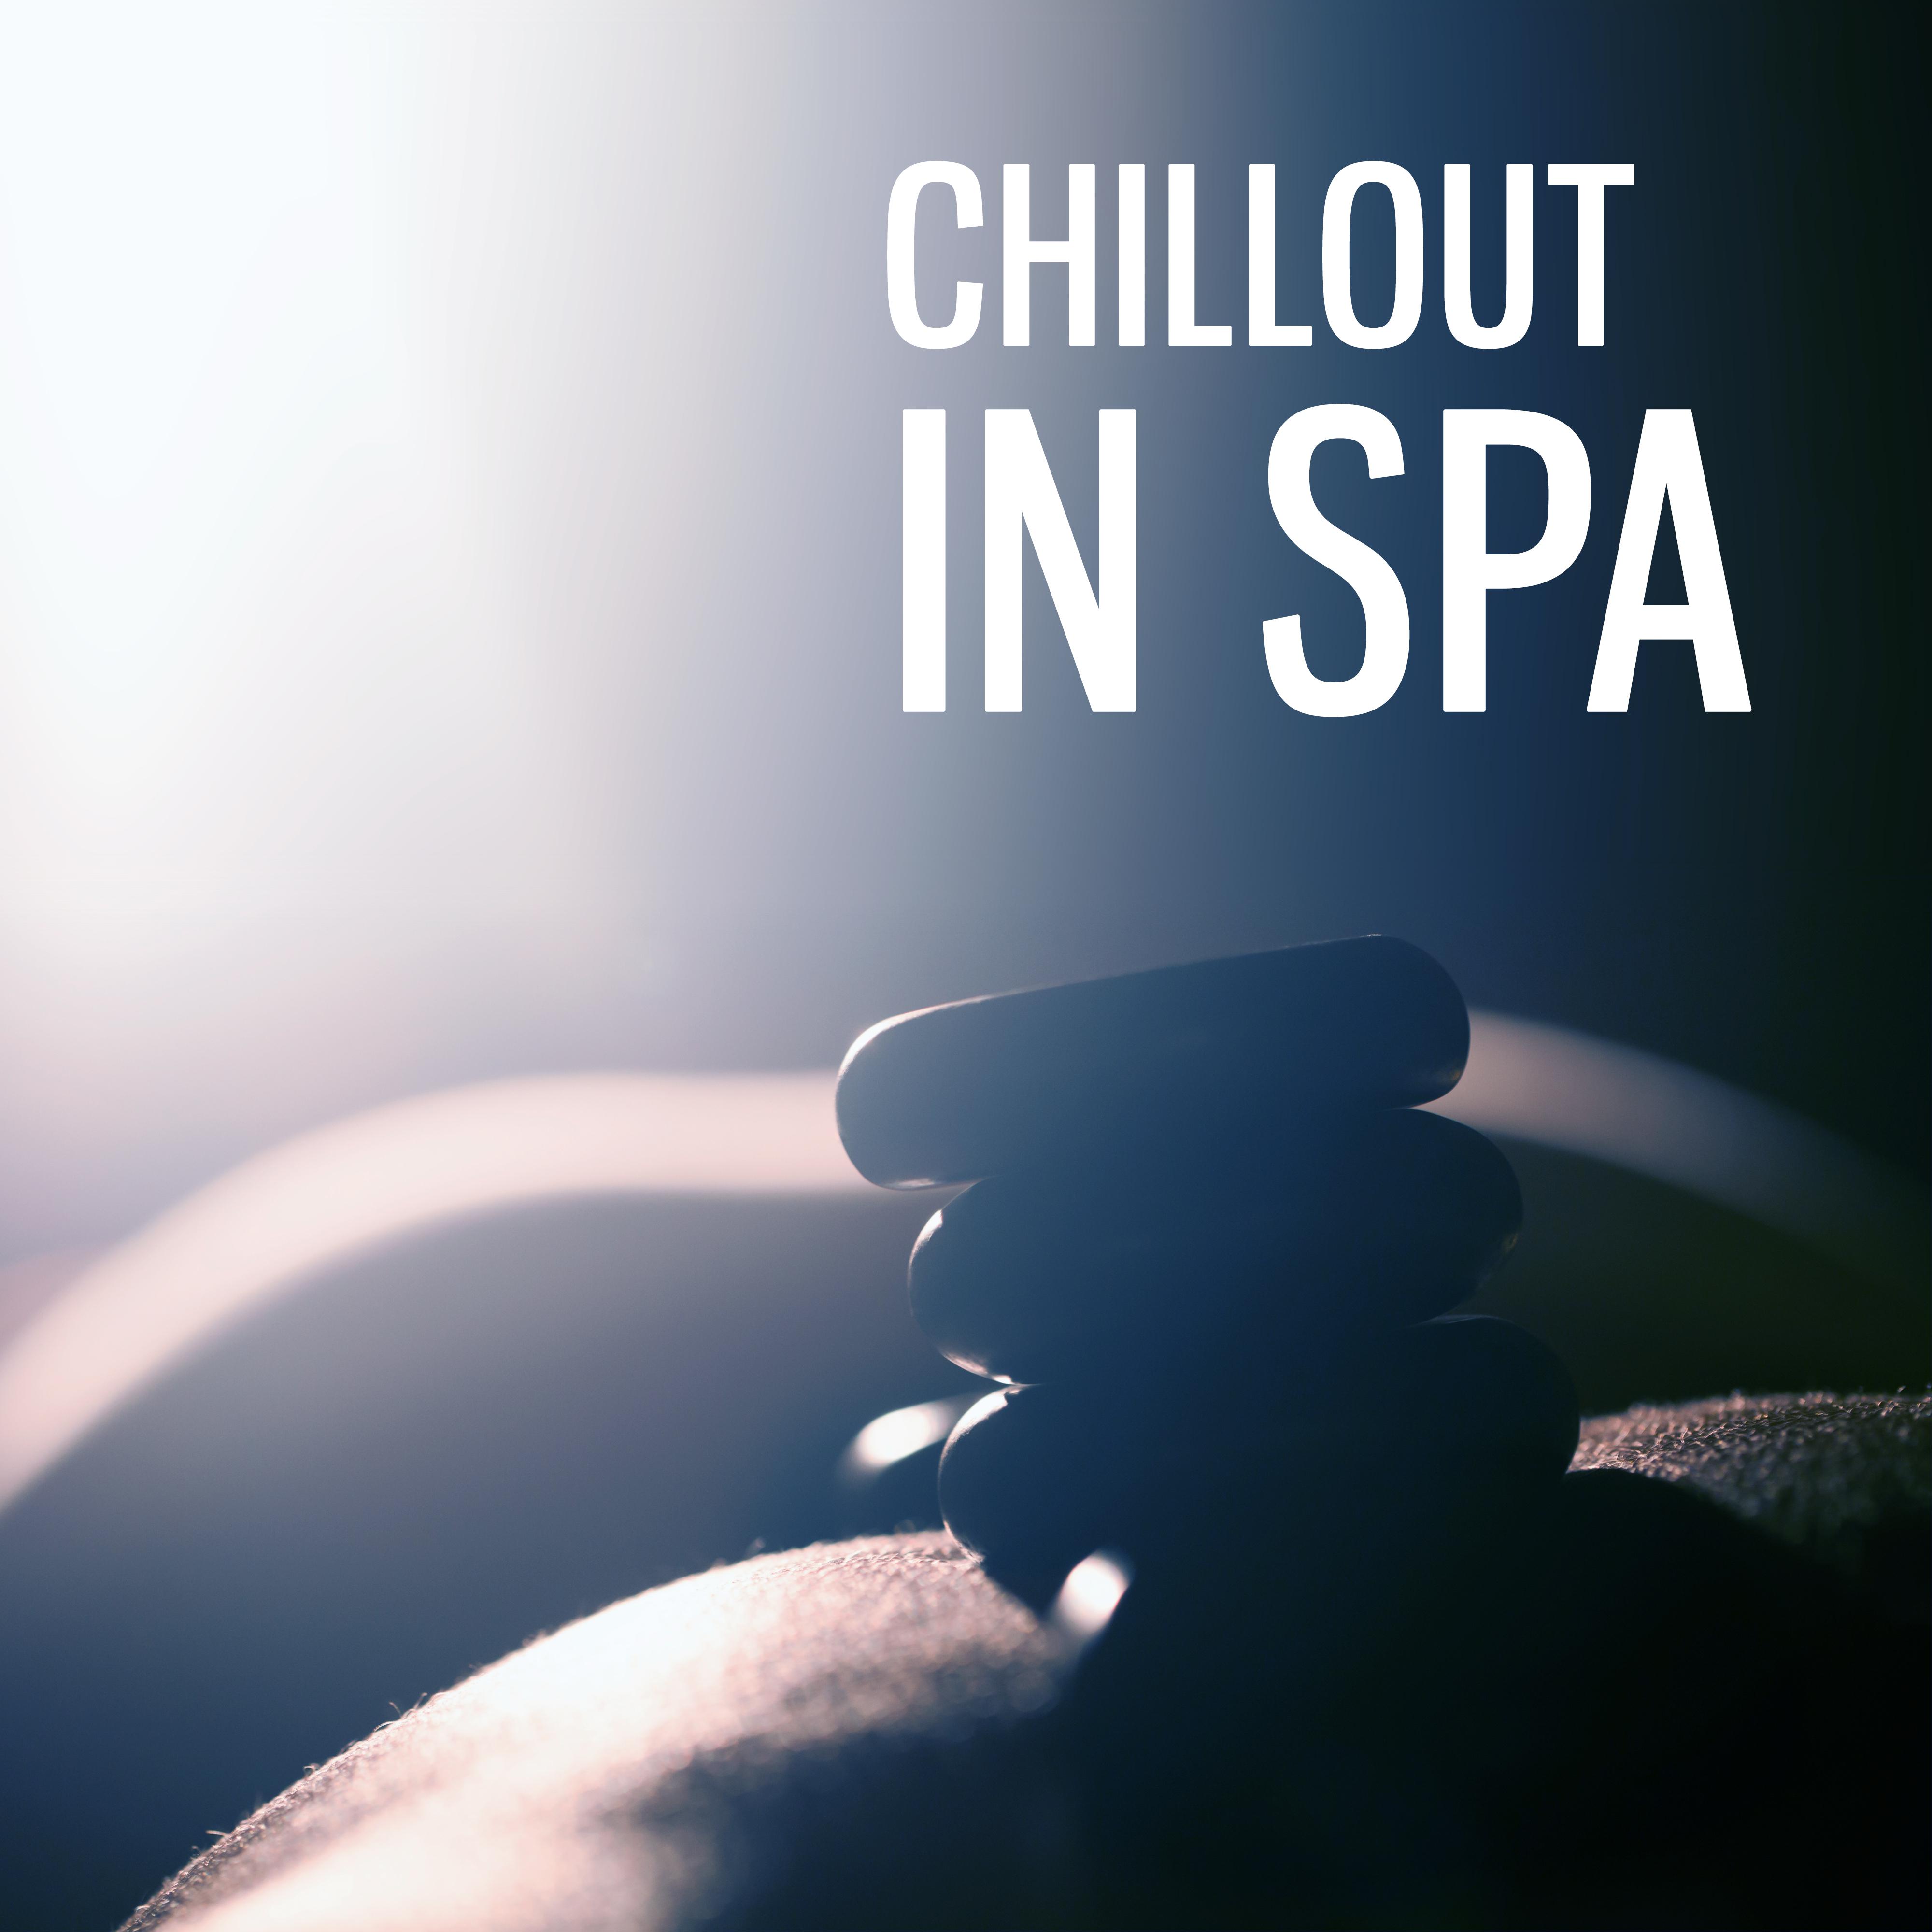 Chillout in Spa – Calming Sounds of Nature, Sensual Massage, Deep Sleep, Healing Melodies, Peaceful Mind